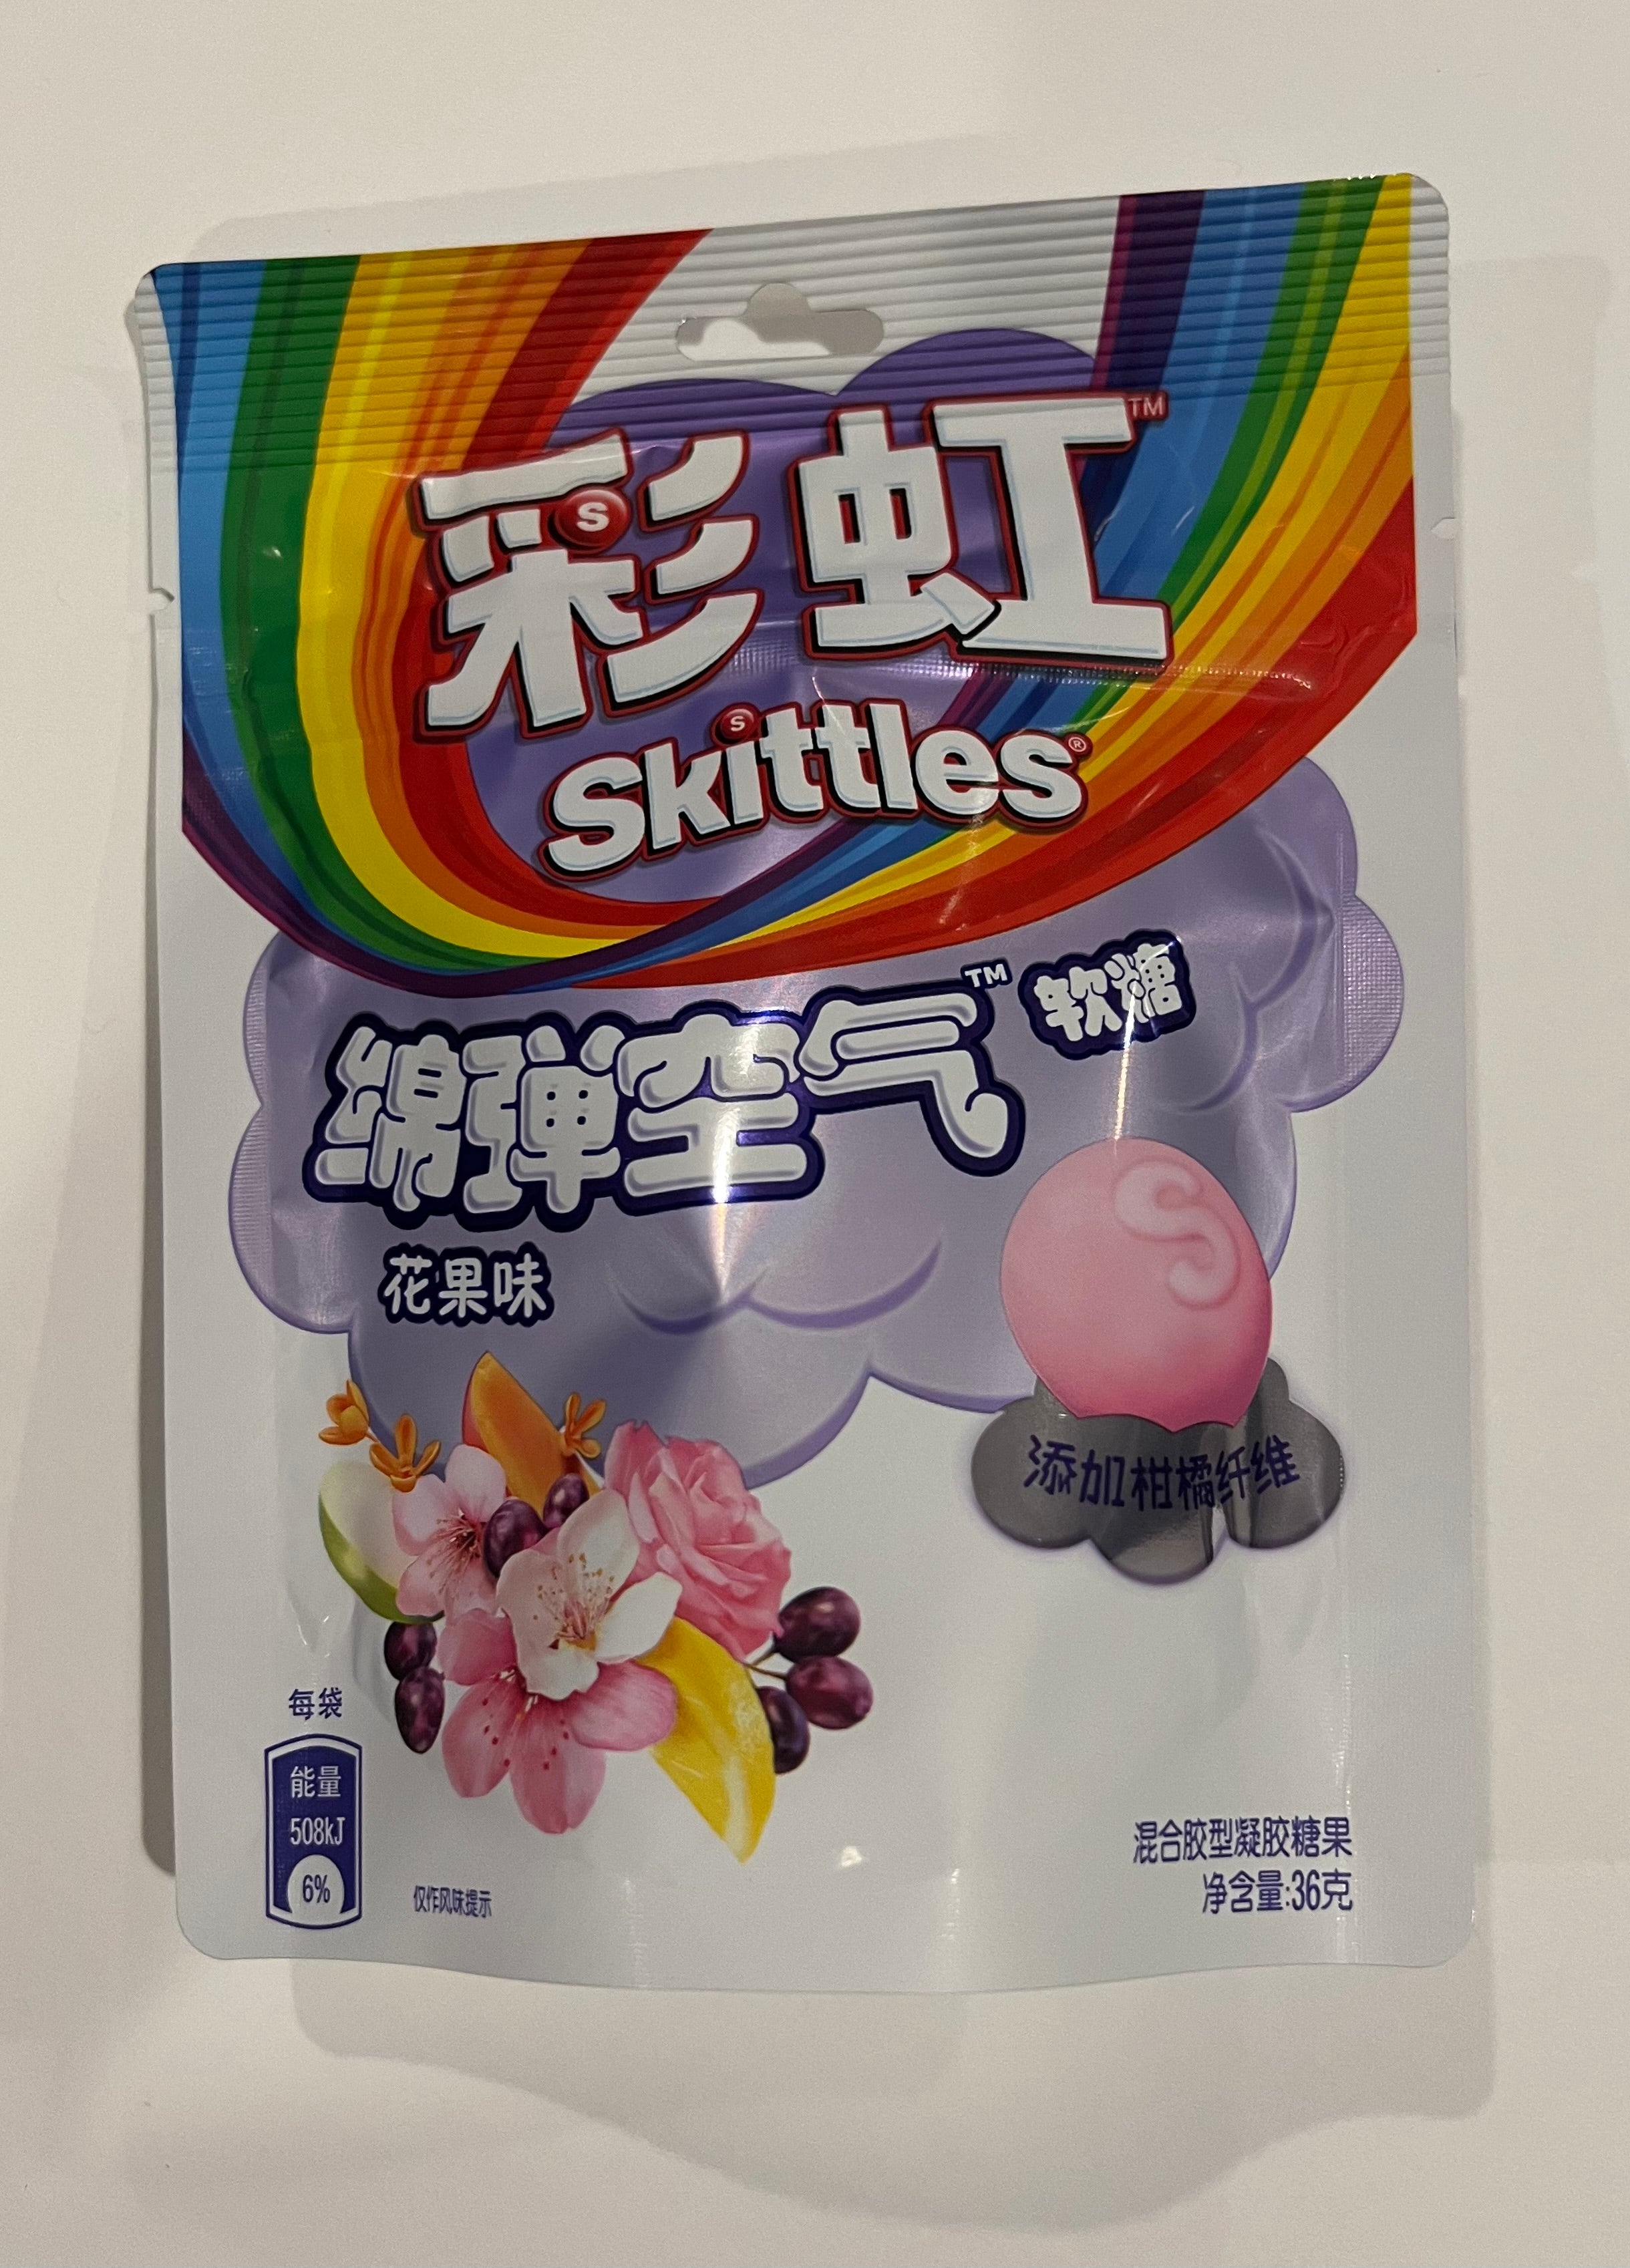 Skittles Floral and fruity